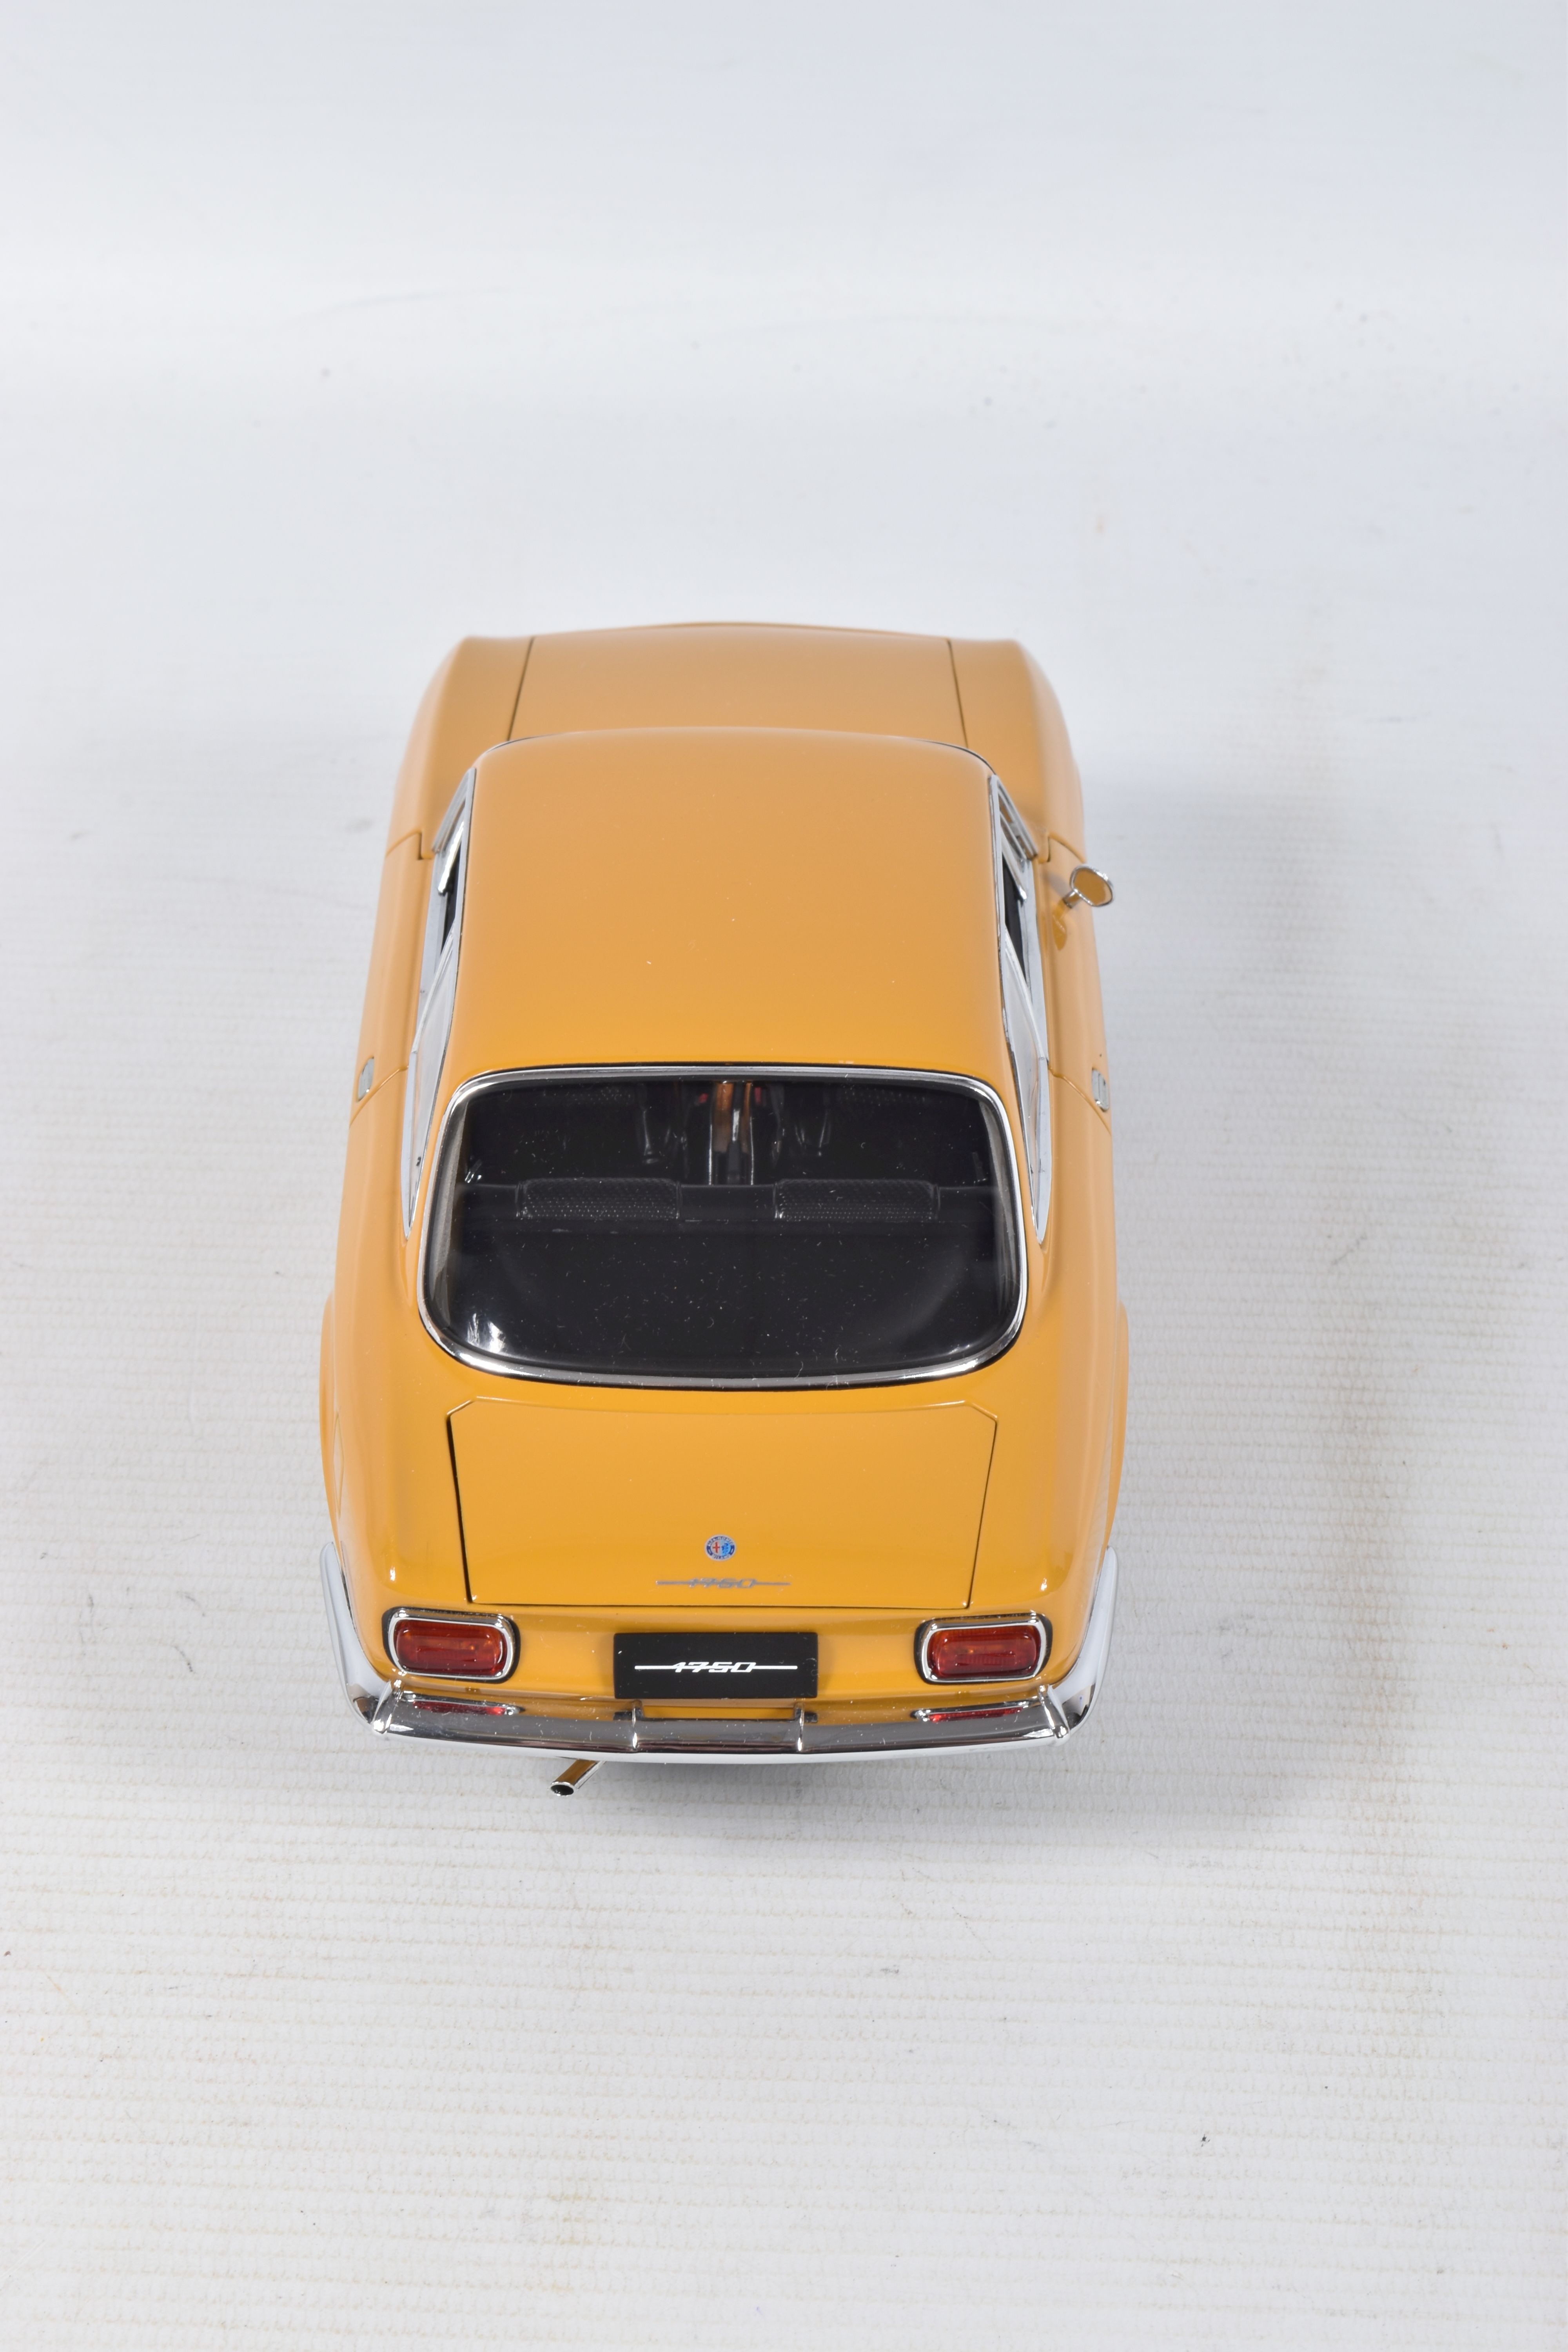 A BOXED AUTOART ALFA ROMEO 1750 GTV SCALE 1:18 MODEL VEHICLE, numbered 70108, painted mustard - Image 5 of 6